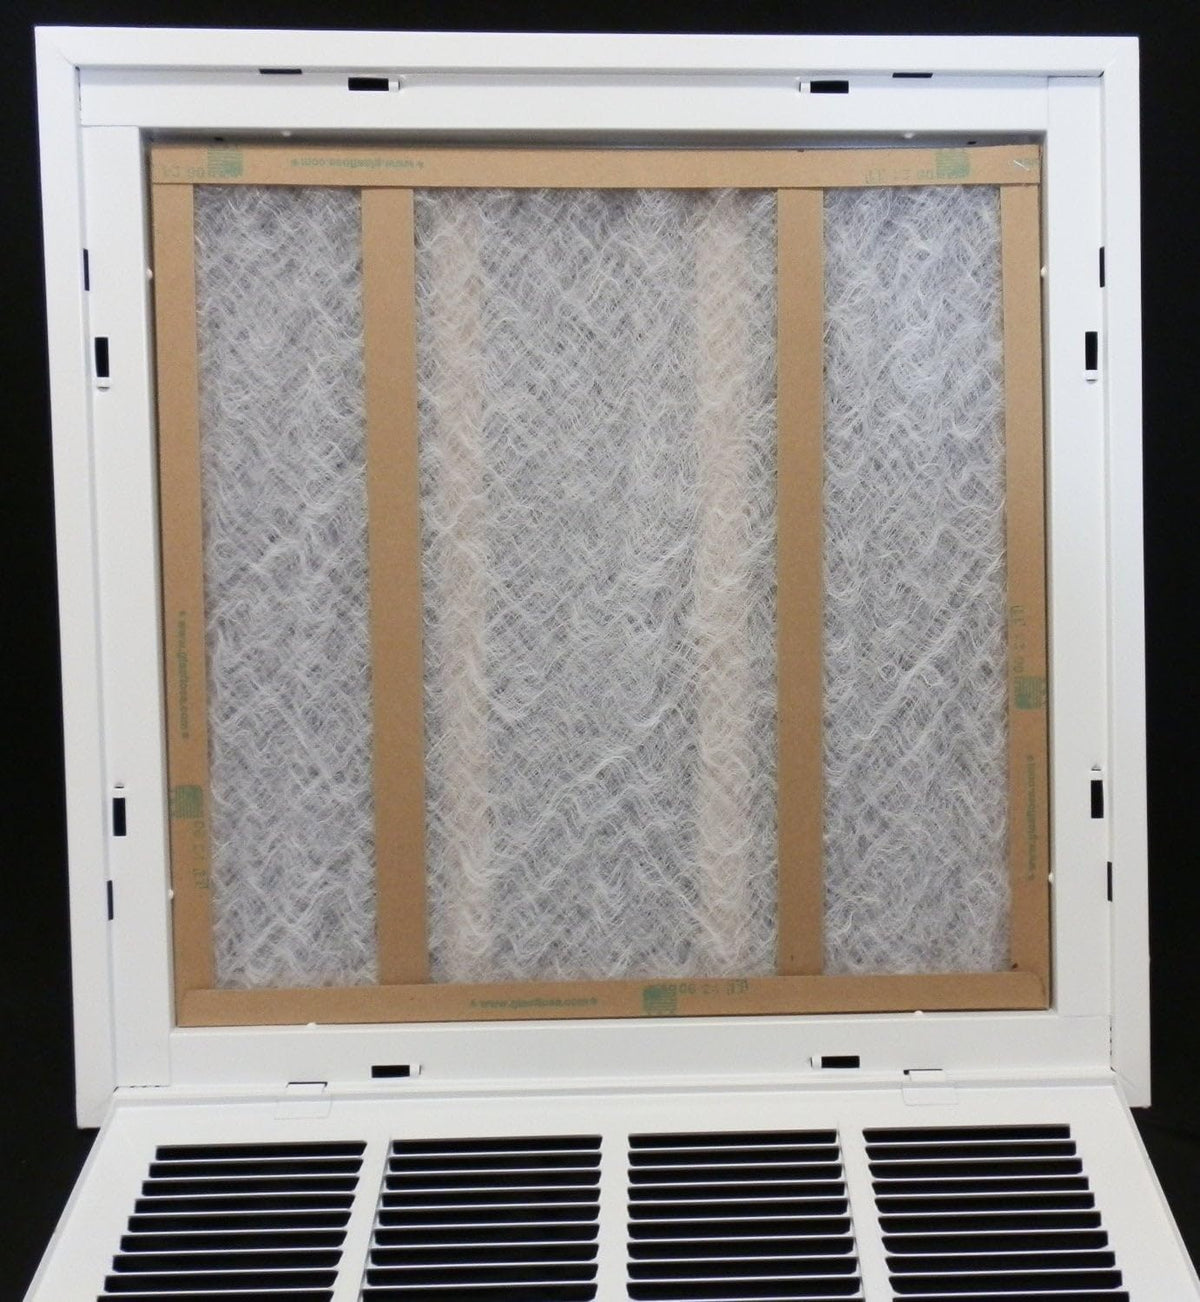 12&quot; X 6&quot; Steel Return Air Filter Grille for 1&quot; Filter - Removable Frame - [Outer Dimensions: 14 5/8&quot; X 8 5/8&quot;]